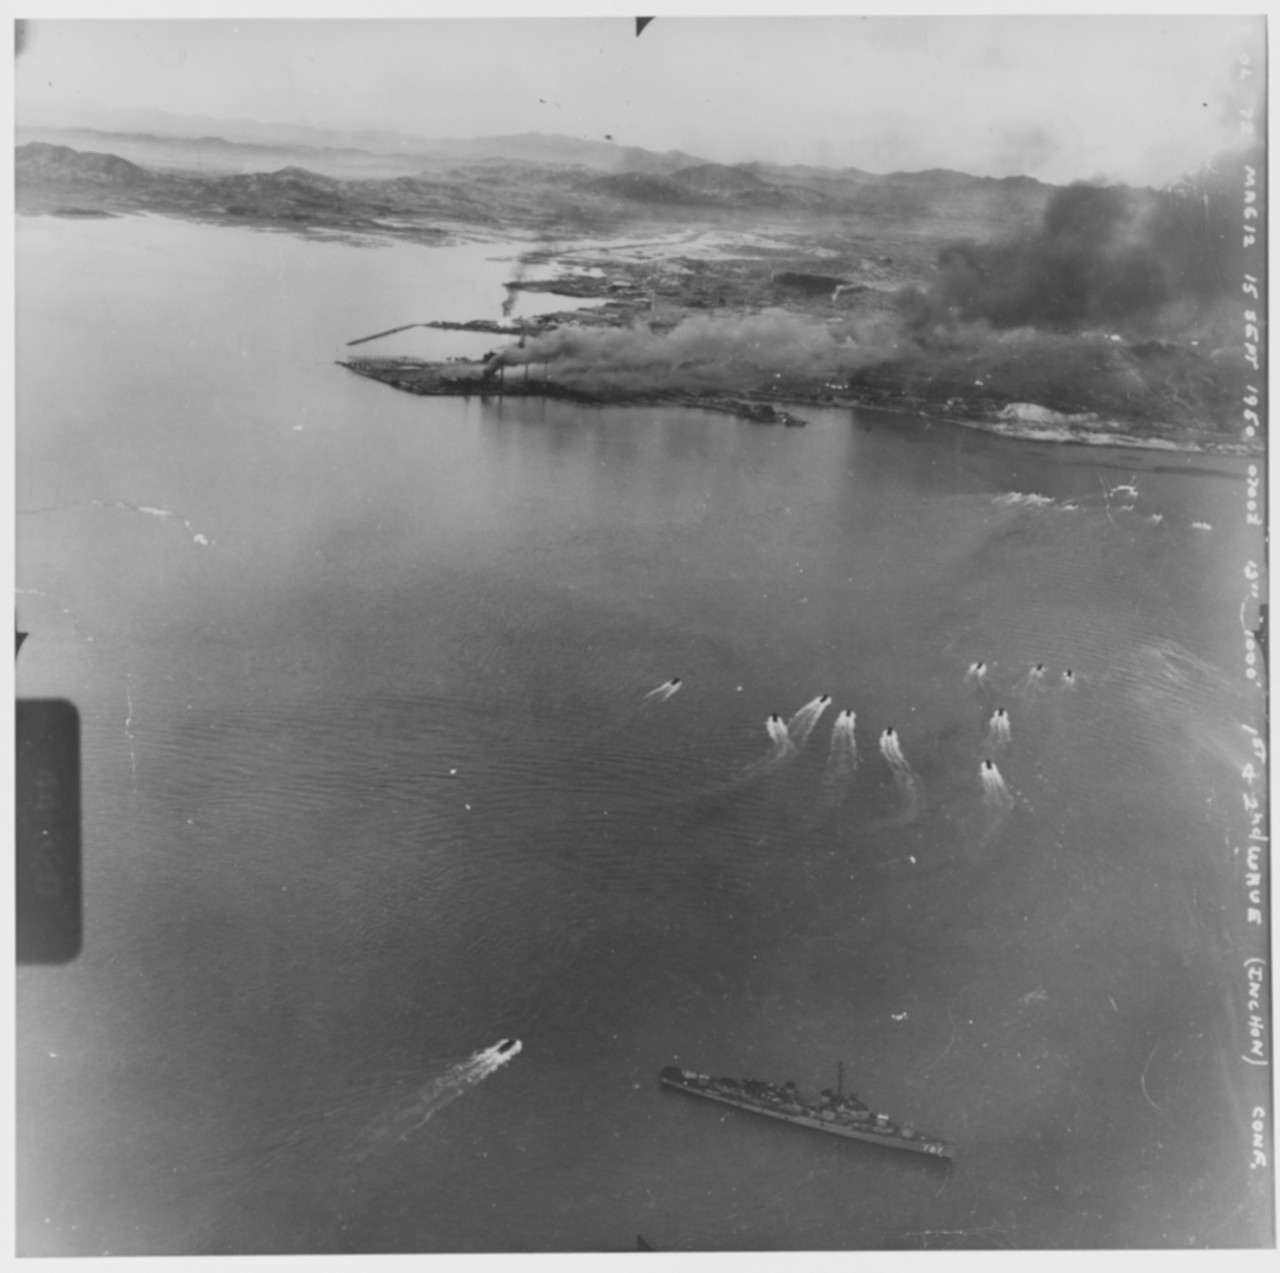 First and second waves of landing craft move toward Red Beach at Inchon at 0700Z.